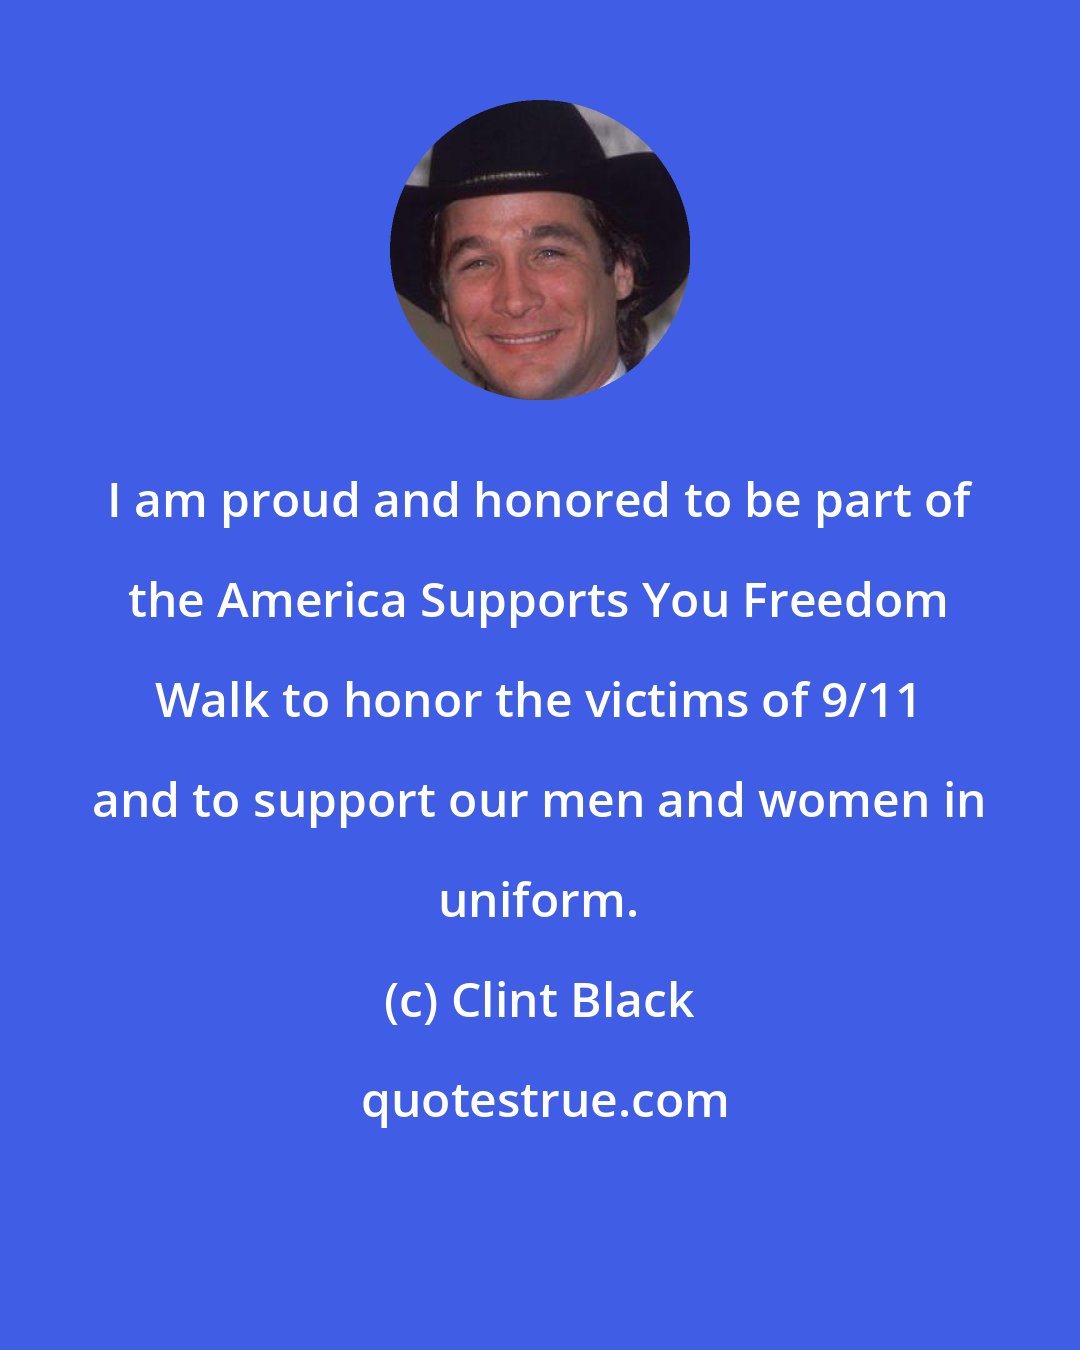 Clint Black: I am proud and honored to be part of the America Supports You Freedom Walk to honor the victims of 9/11 and to support our men and women in uniform.